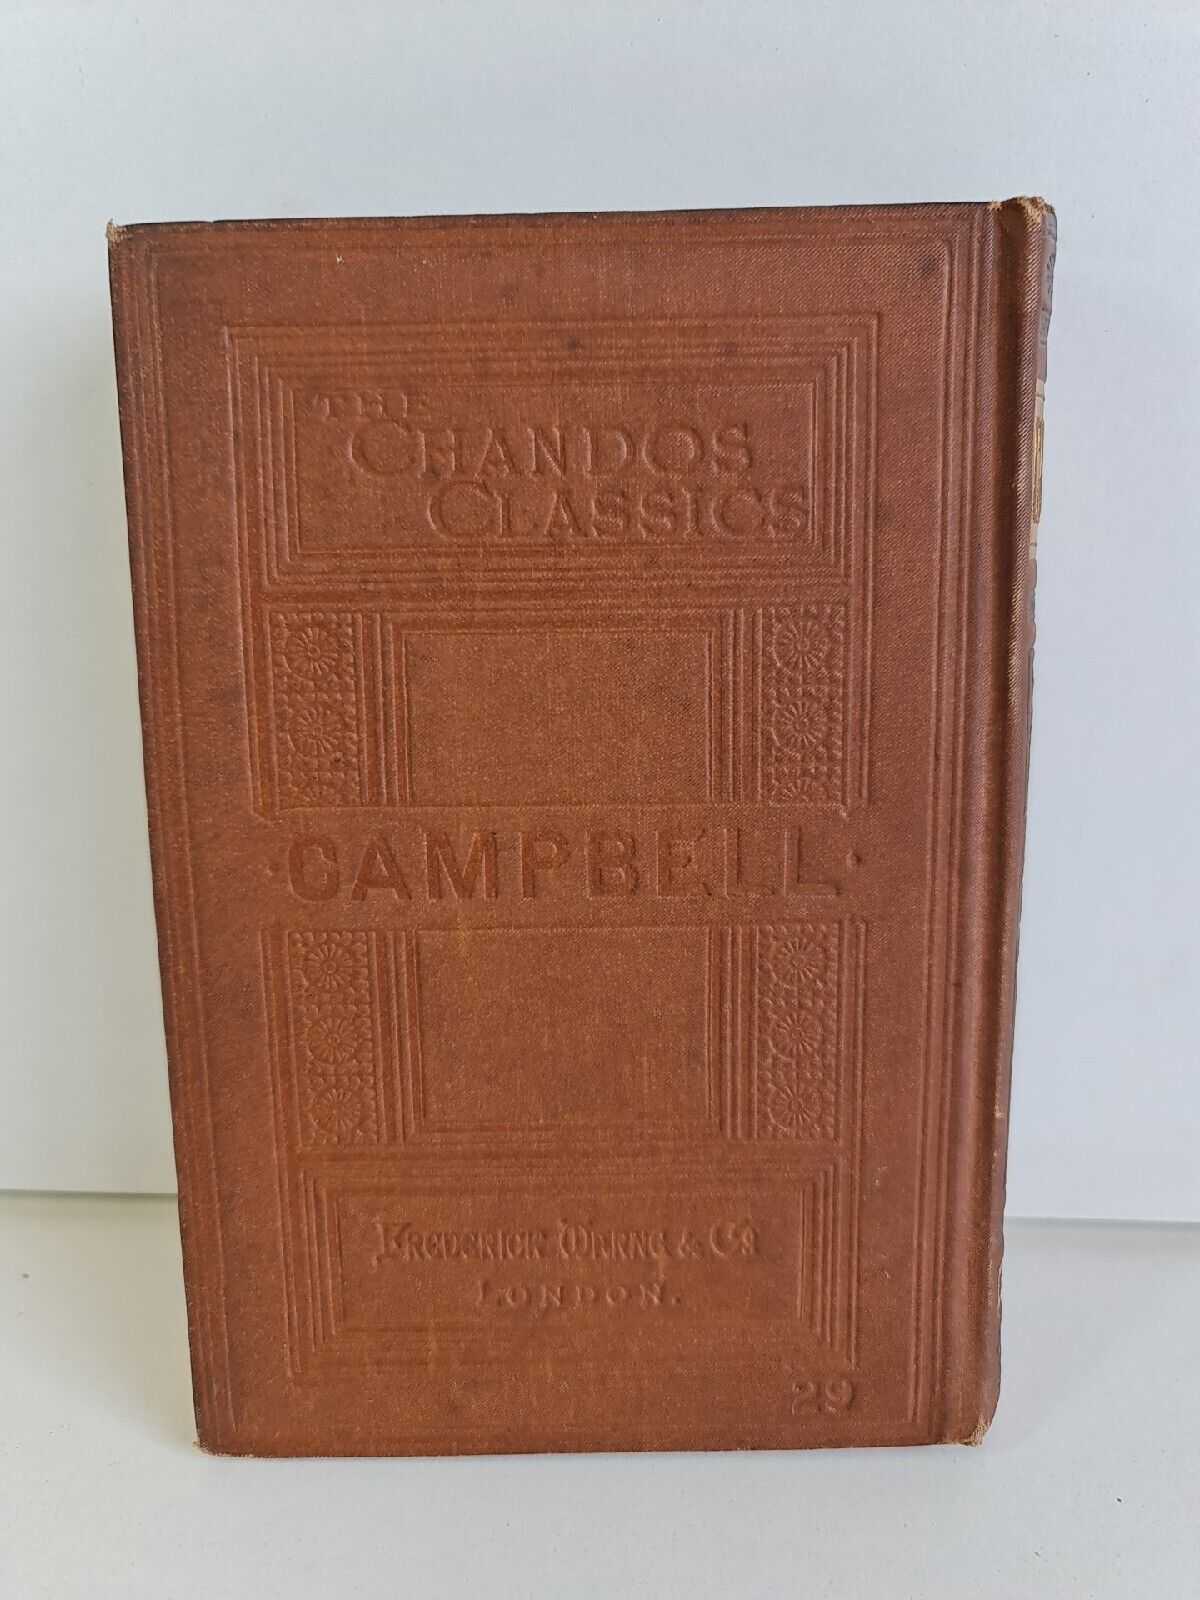 The Poetical Works of Thomas Campbell (Chandos Classics)